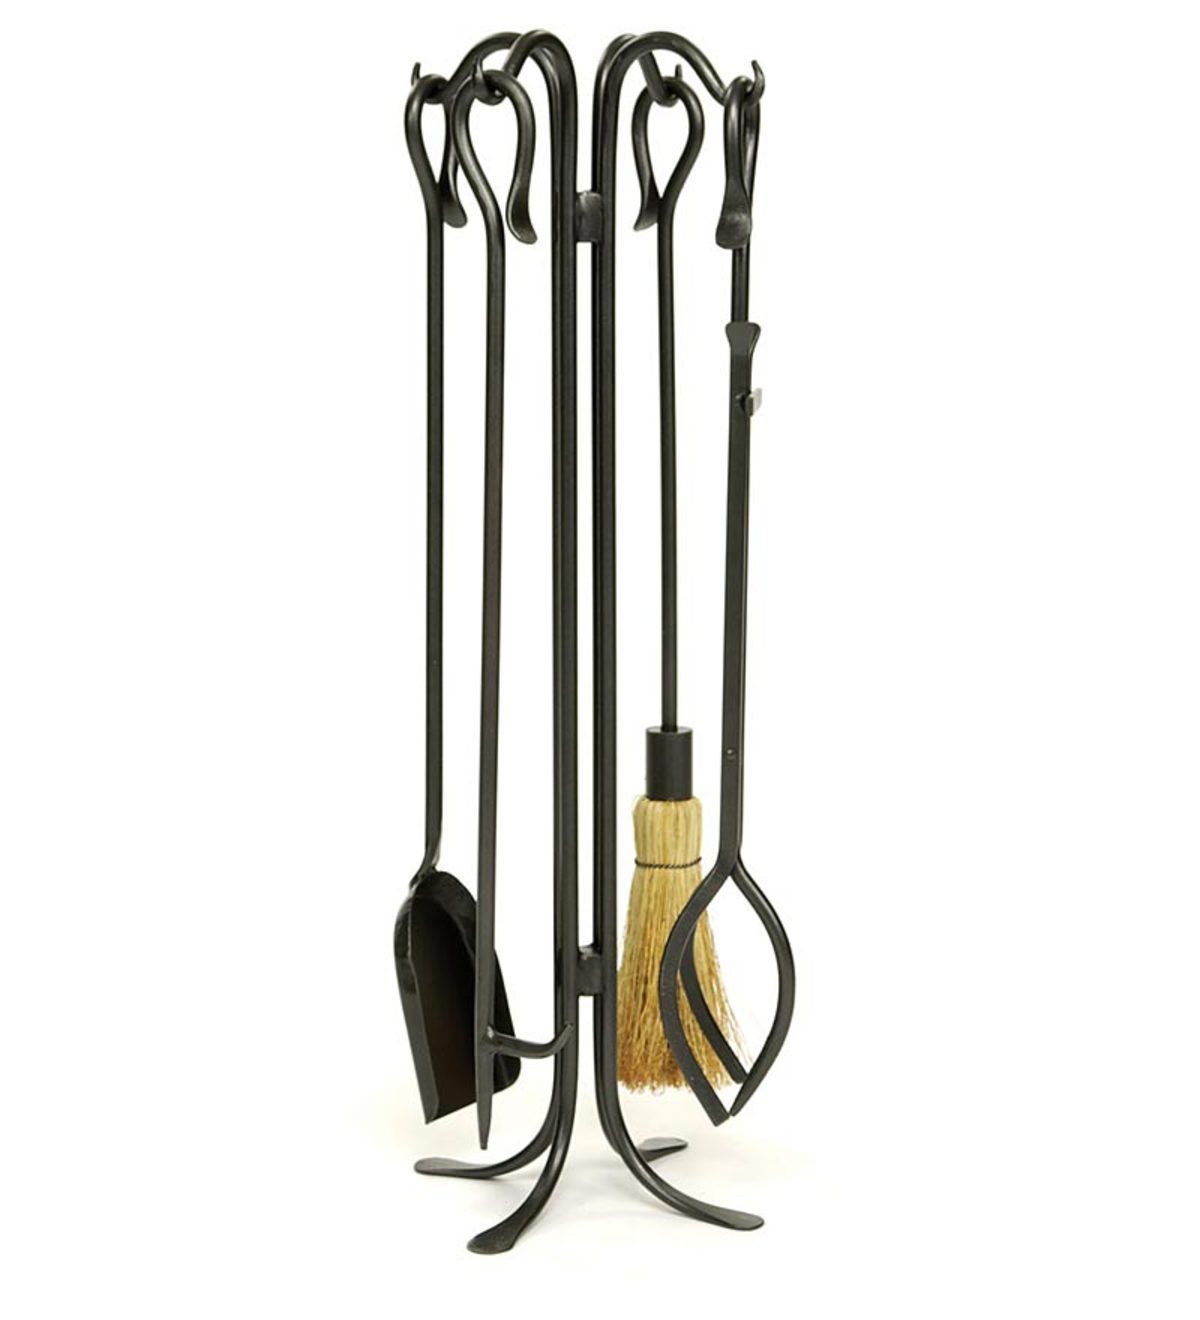 Wrought Iron Hearth Hooks 5-Piece Fireplace Tool Set In Powder-Coated Finish